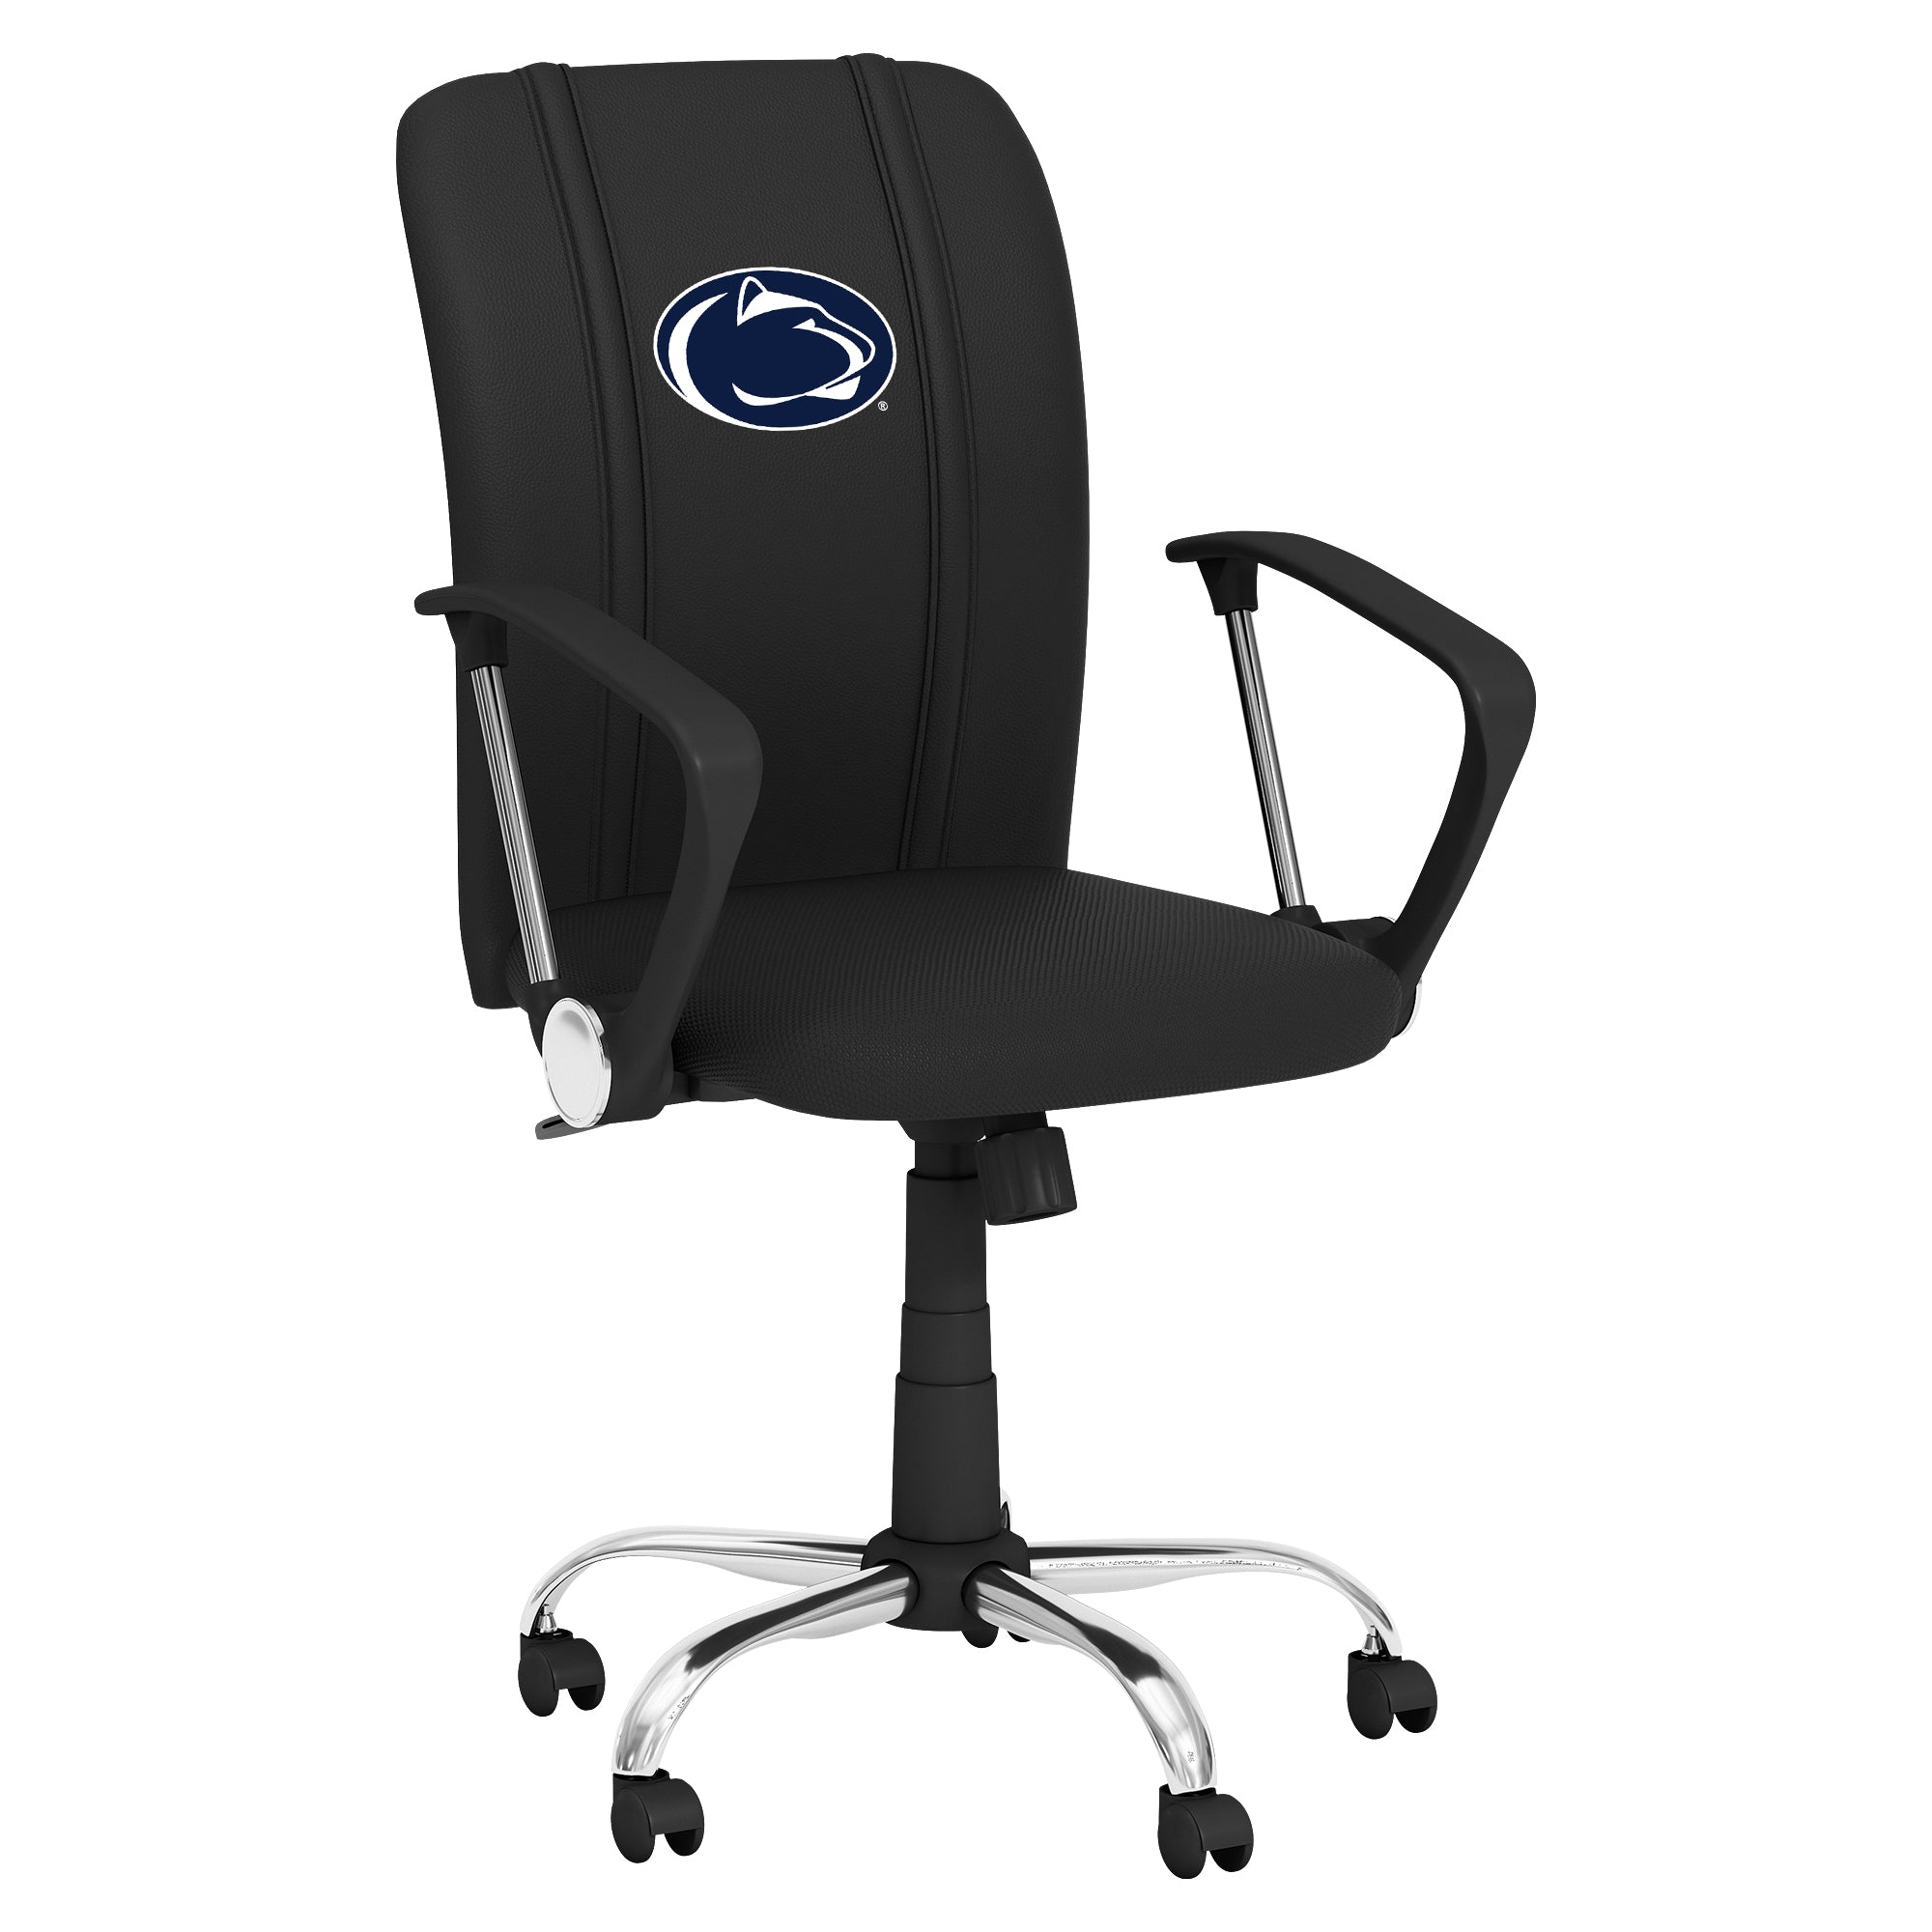 Penn State Nittany Lions Curve Task Chair with Penn State Nittany Lions Logo